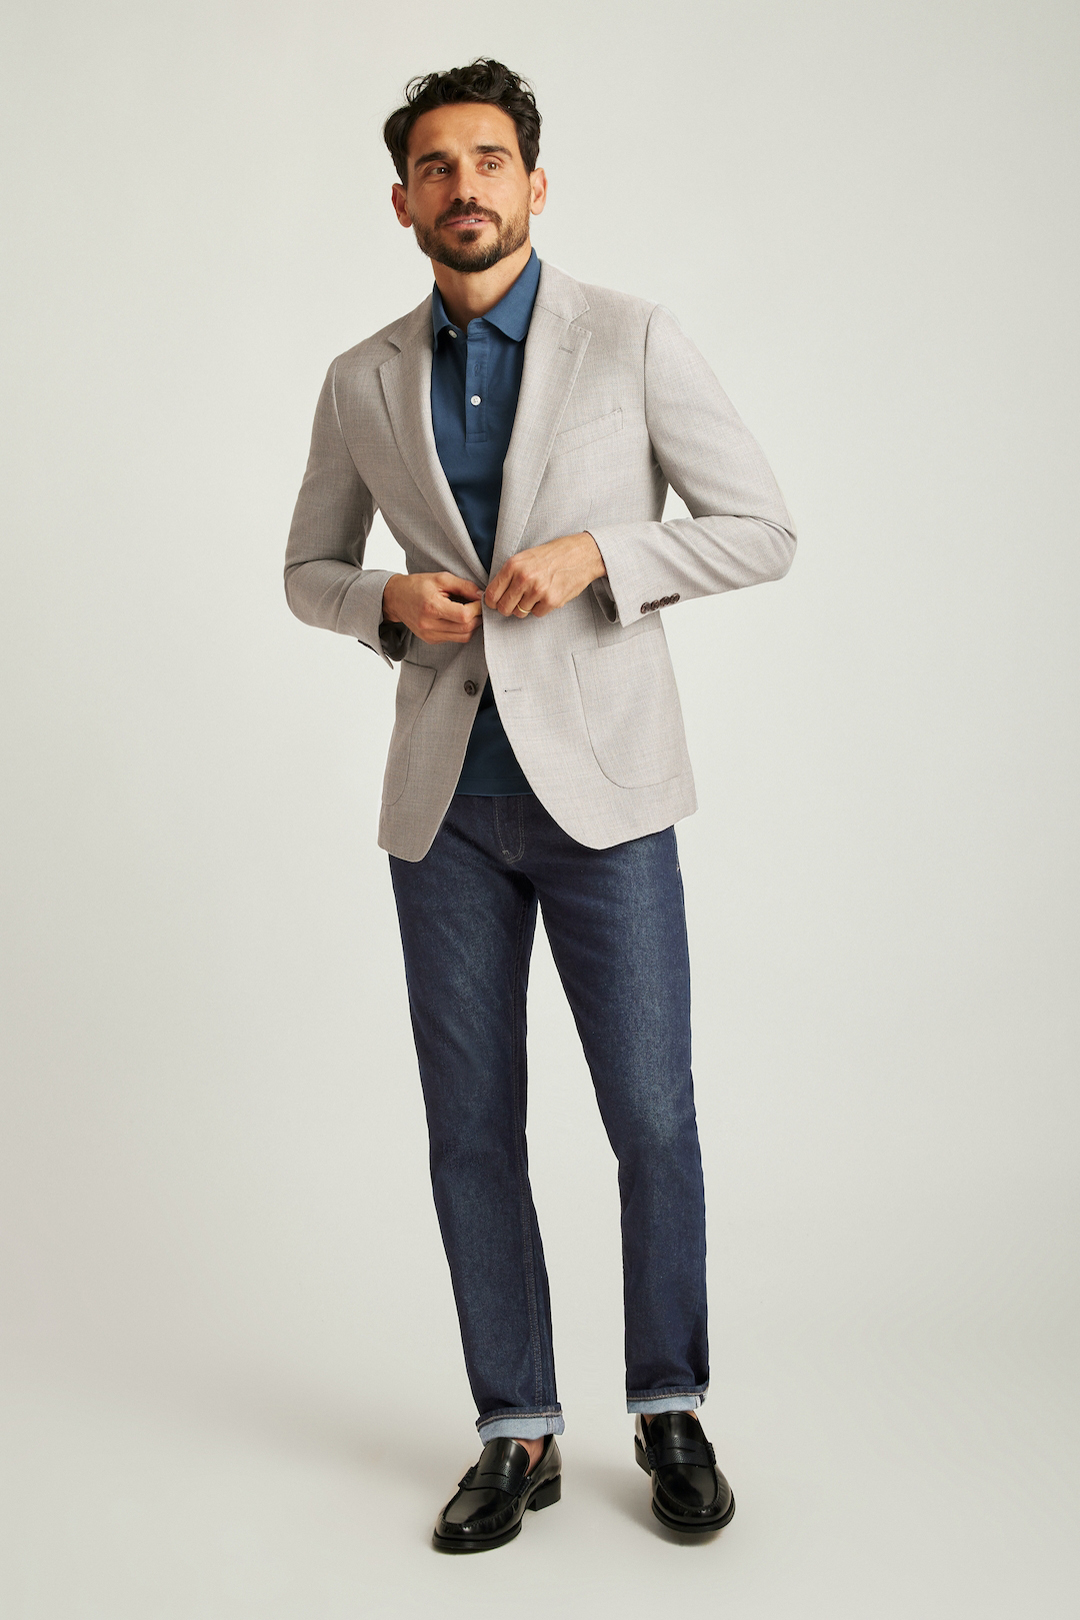 Gray blazer, blue polo t-shirt, navy denim jeans, and black penny loafers outfit